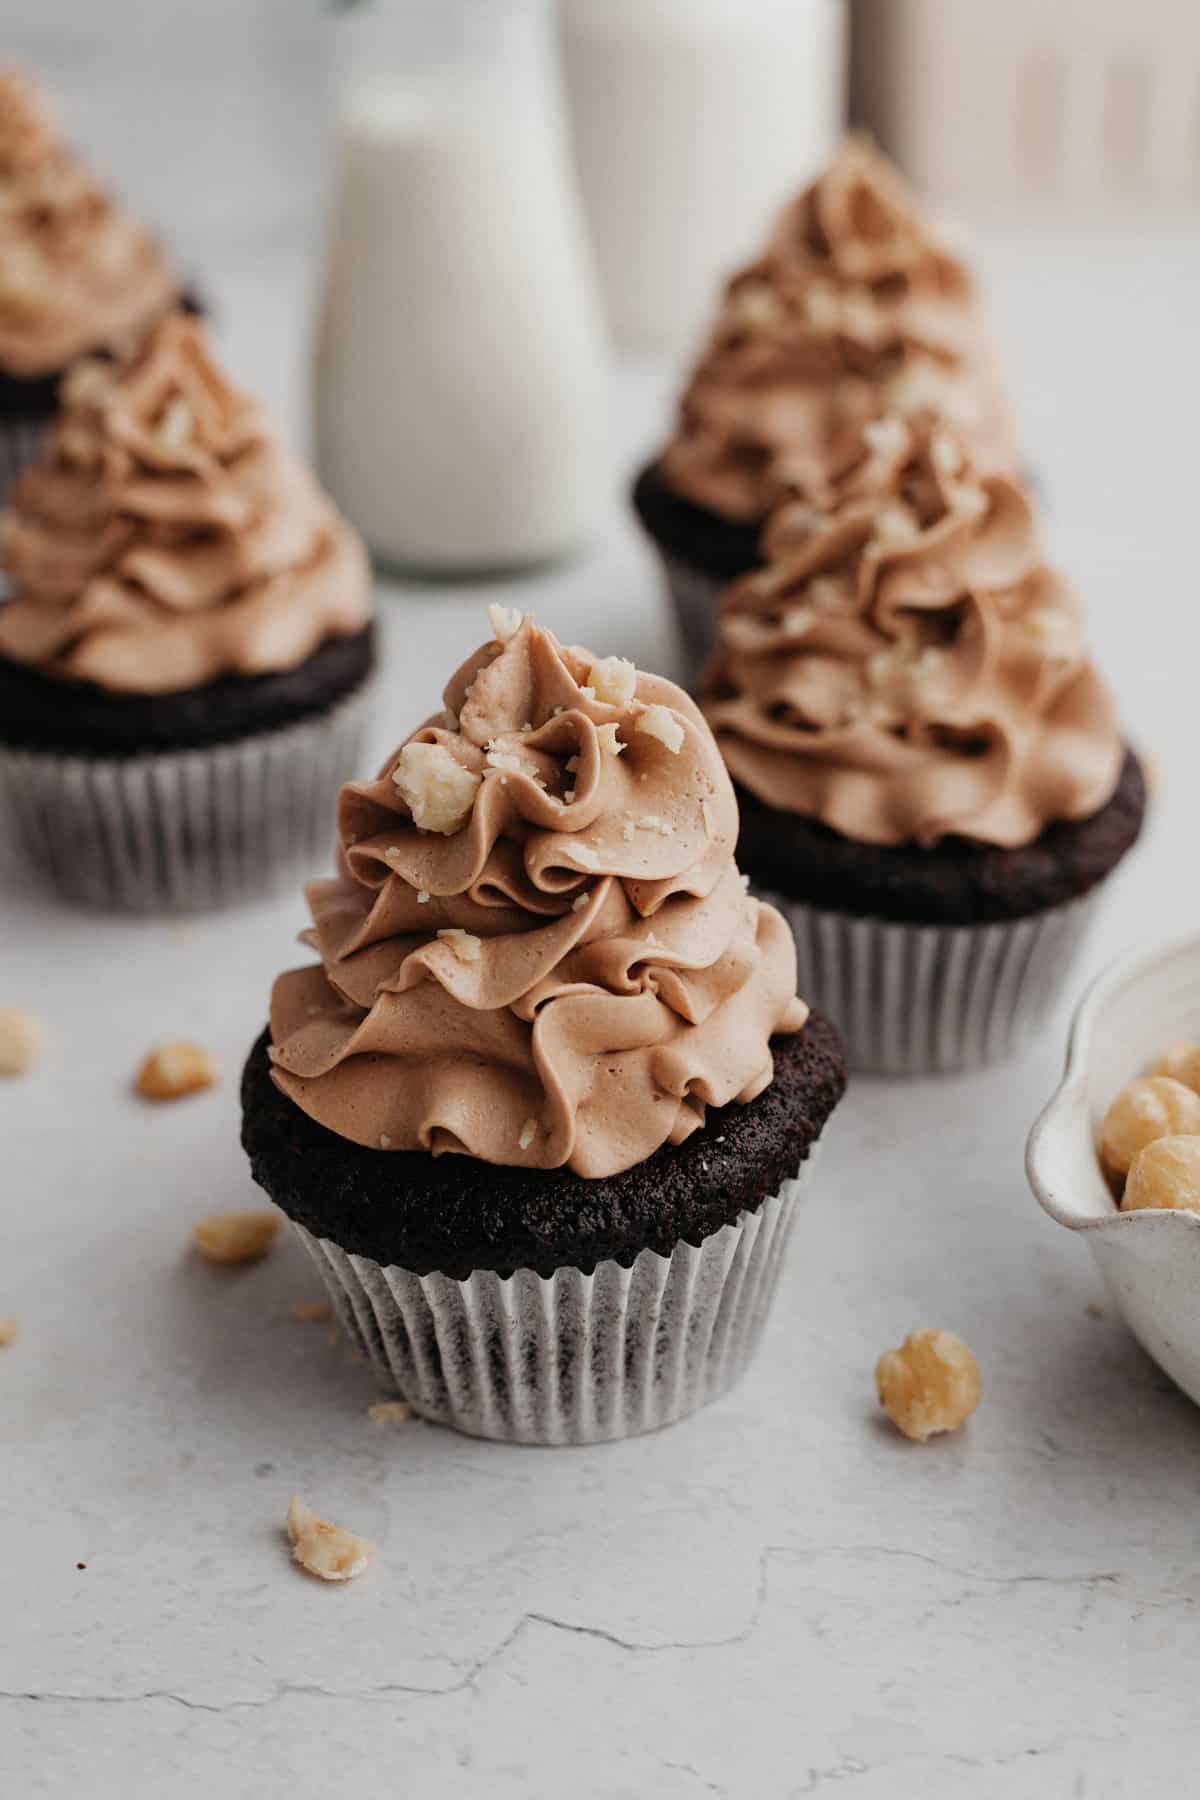 chocolate frosted chocolate cupcakes, sprinkled with chopped hazelnuts.